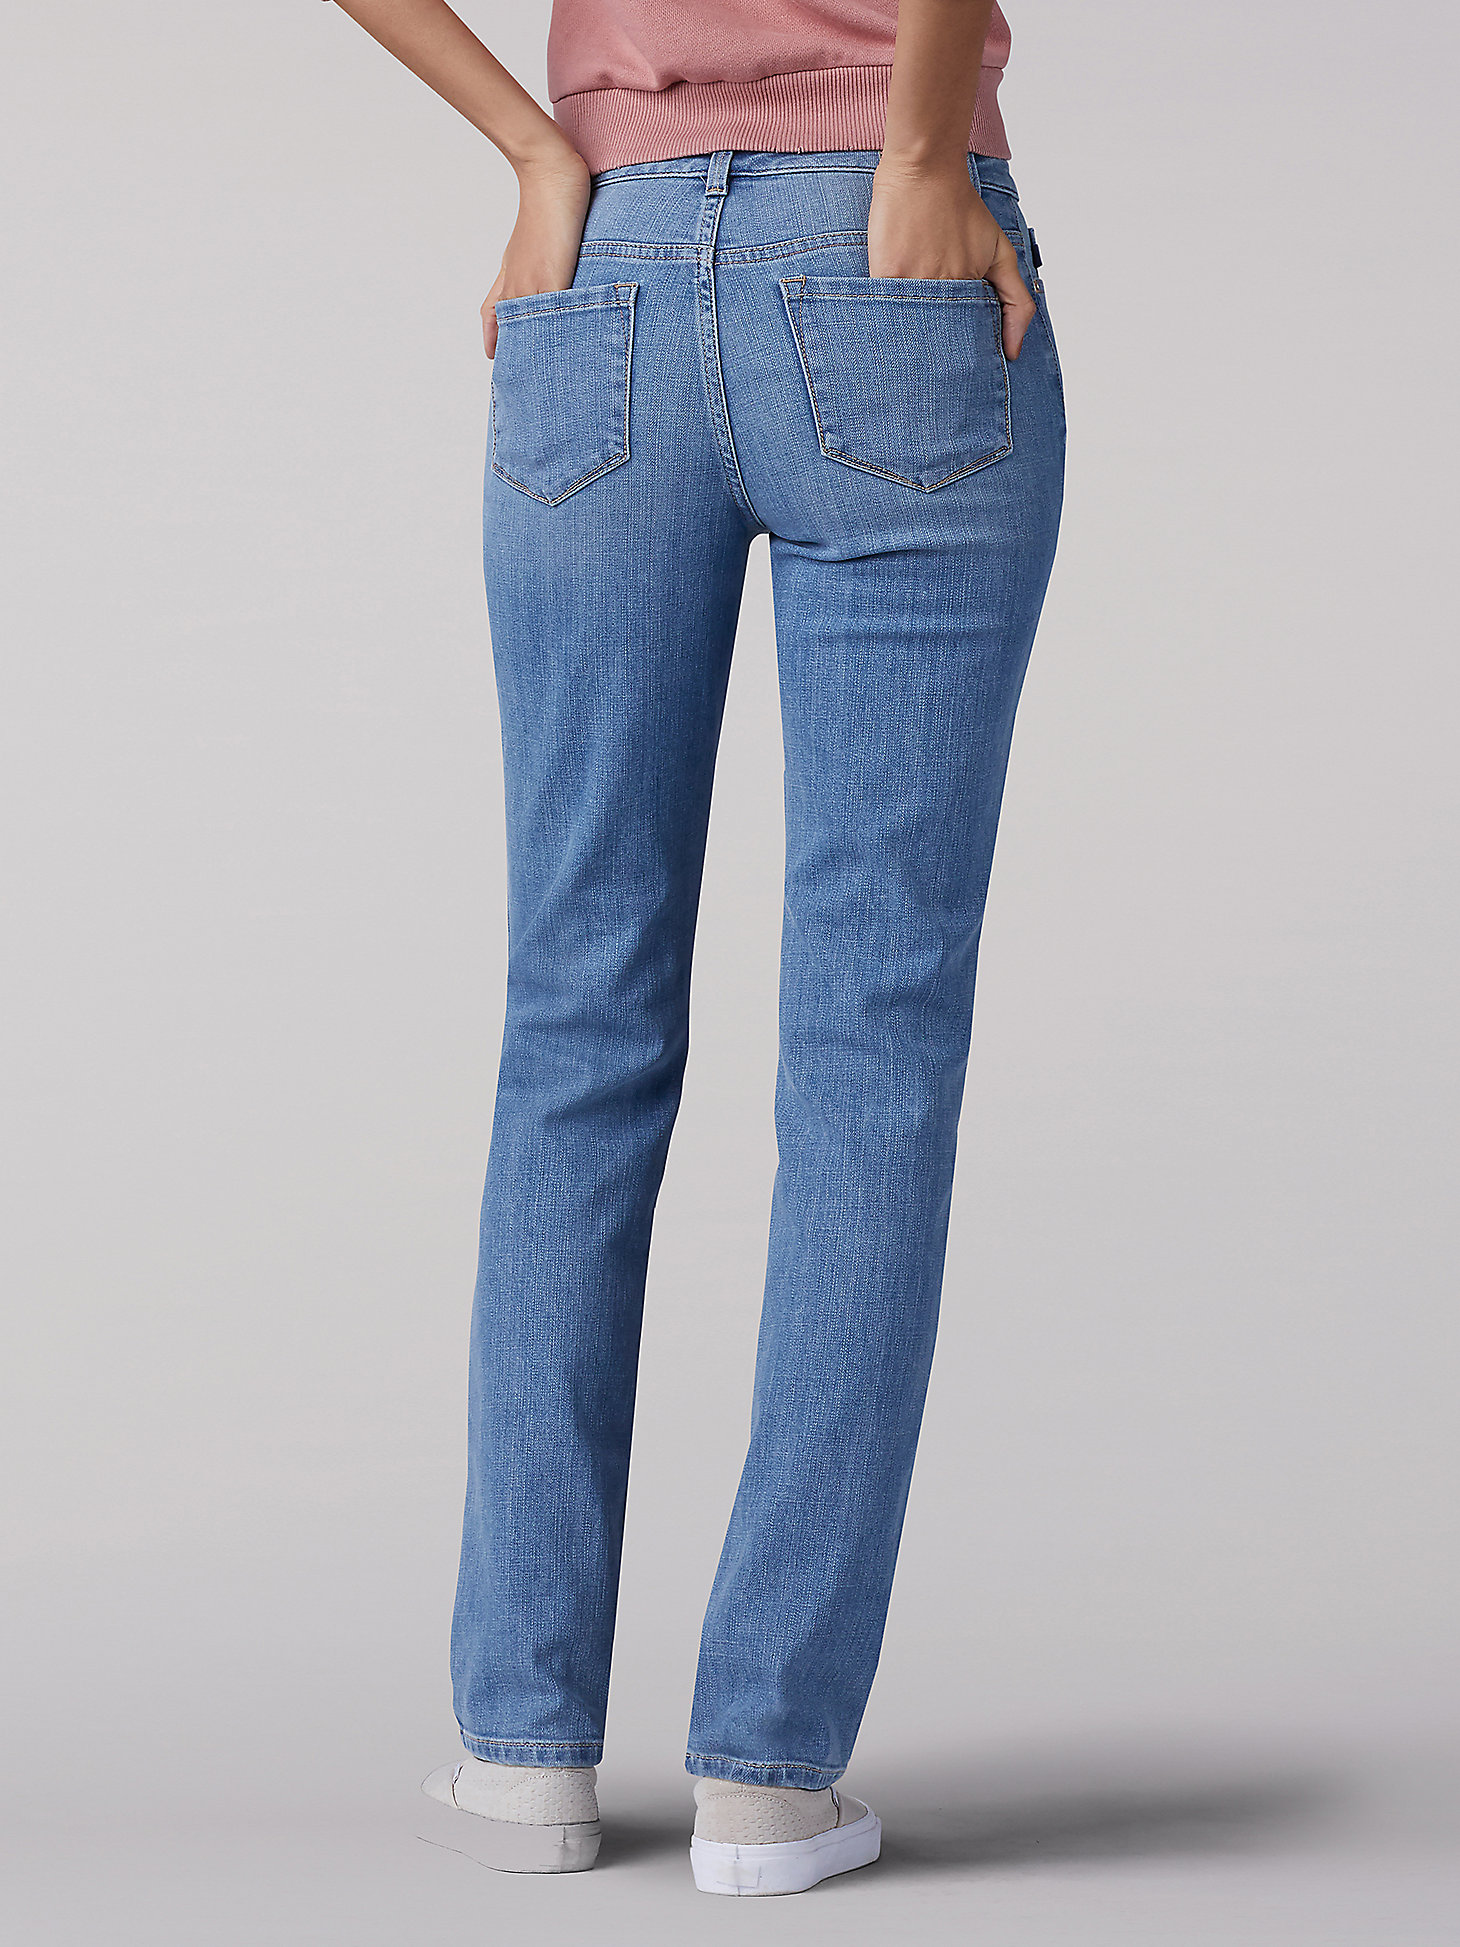 Women’s Instantly Slims Relaxed Fit Straight Leg Jean Classic Fit in Inspire Blue alternative view 1